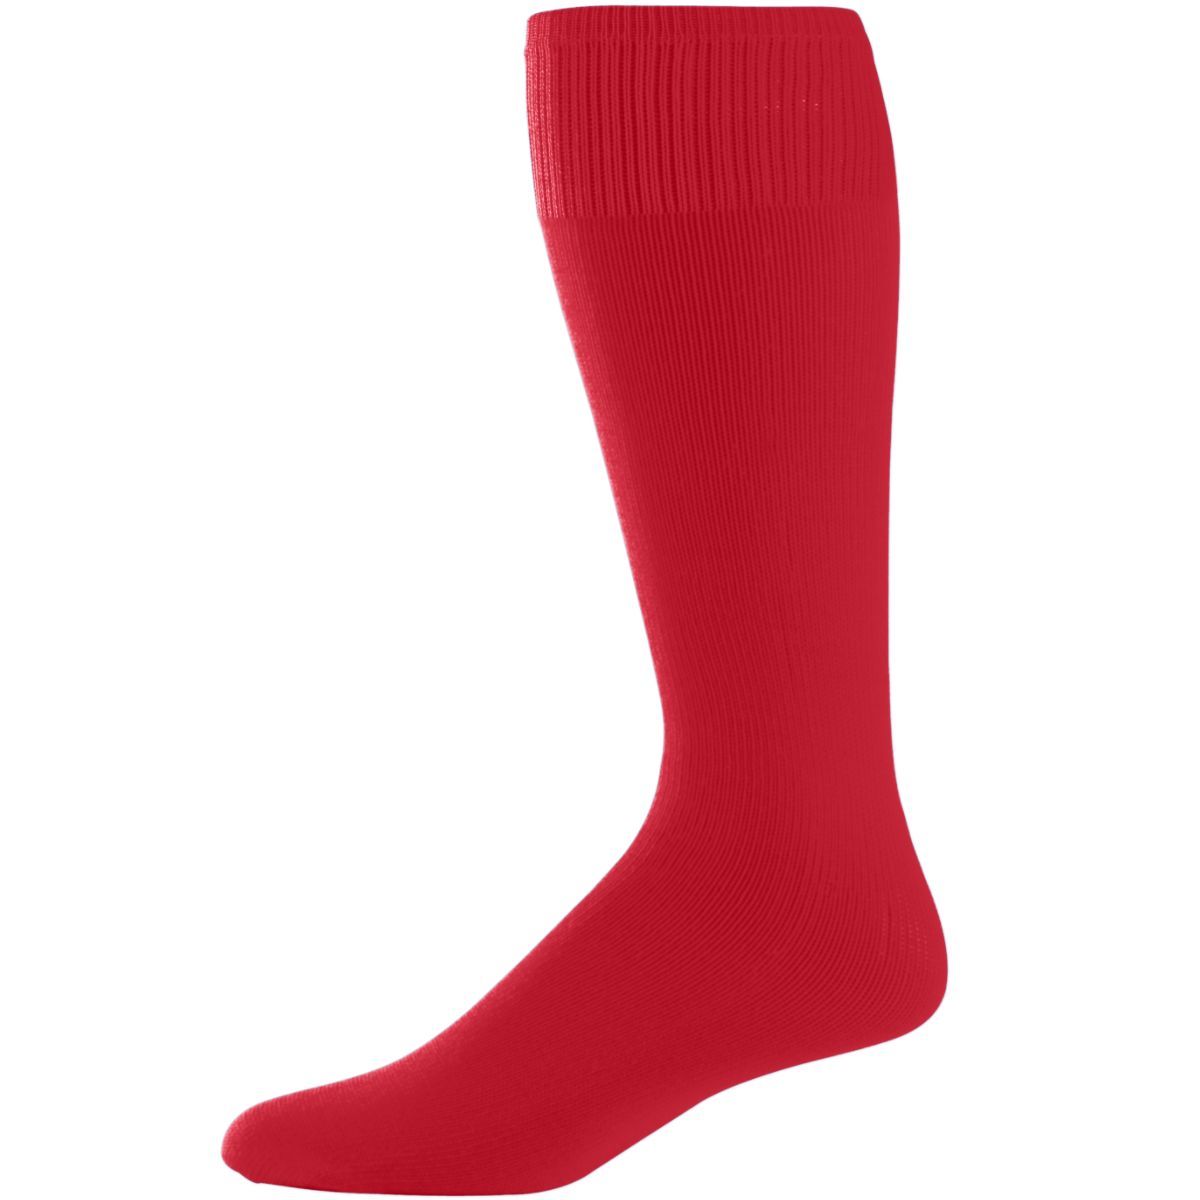 Augusta Sportswear Game Socks in Red  -Part of the Accessories, Augusta-Products, Accessories-Socks product lines at KanaleyCreations.com